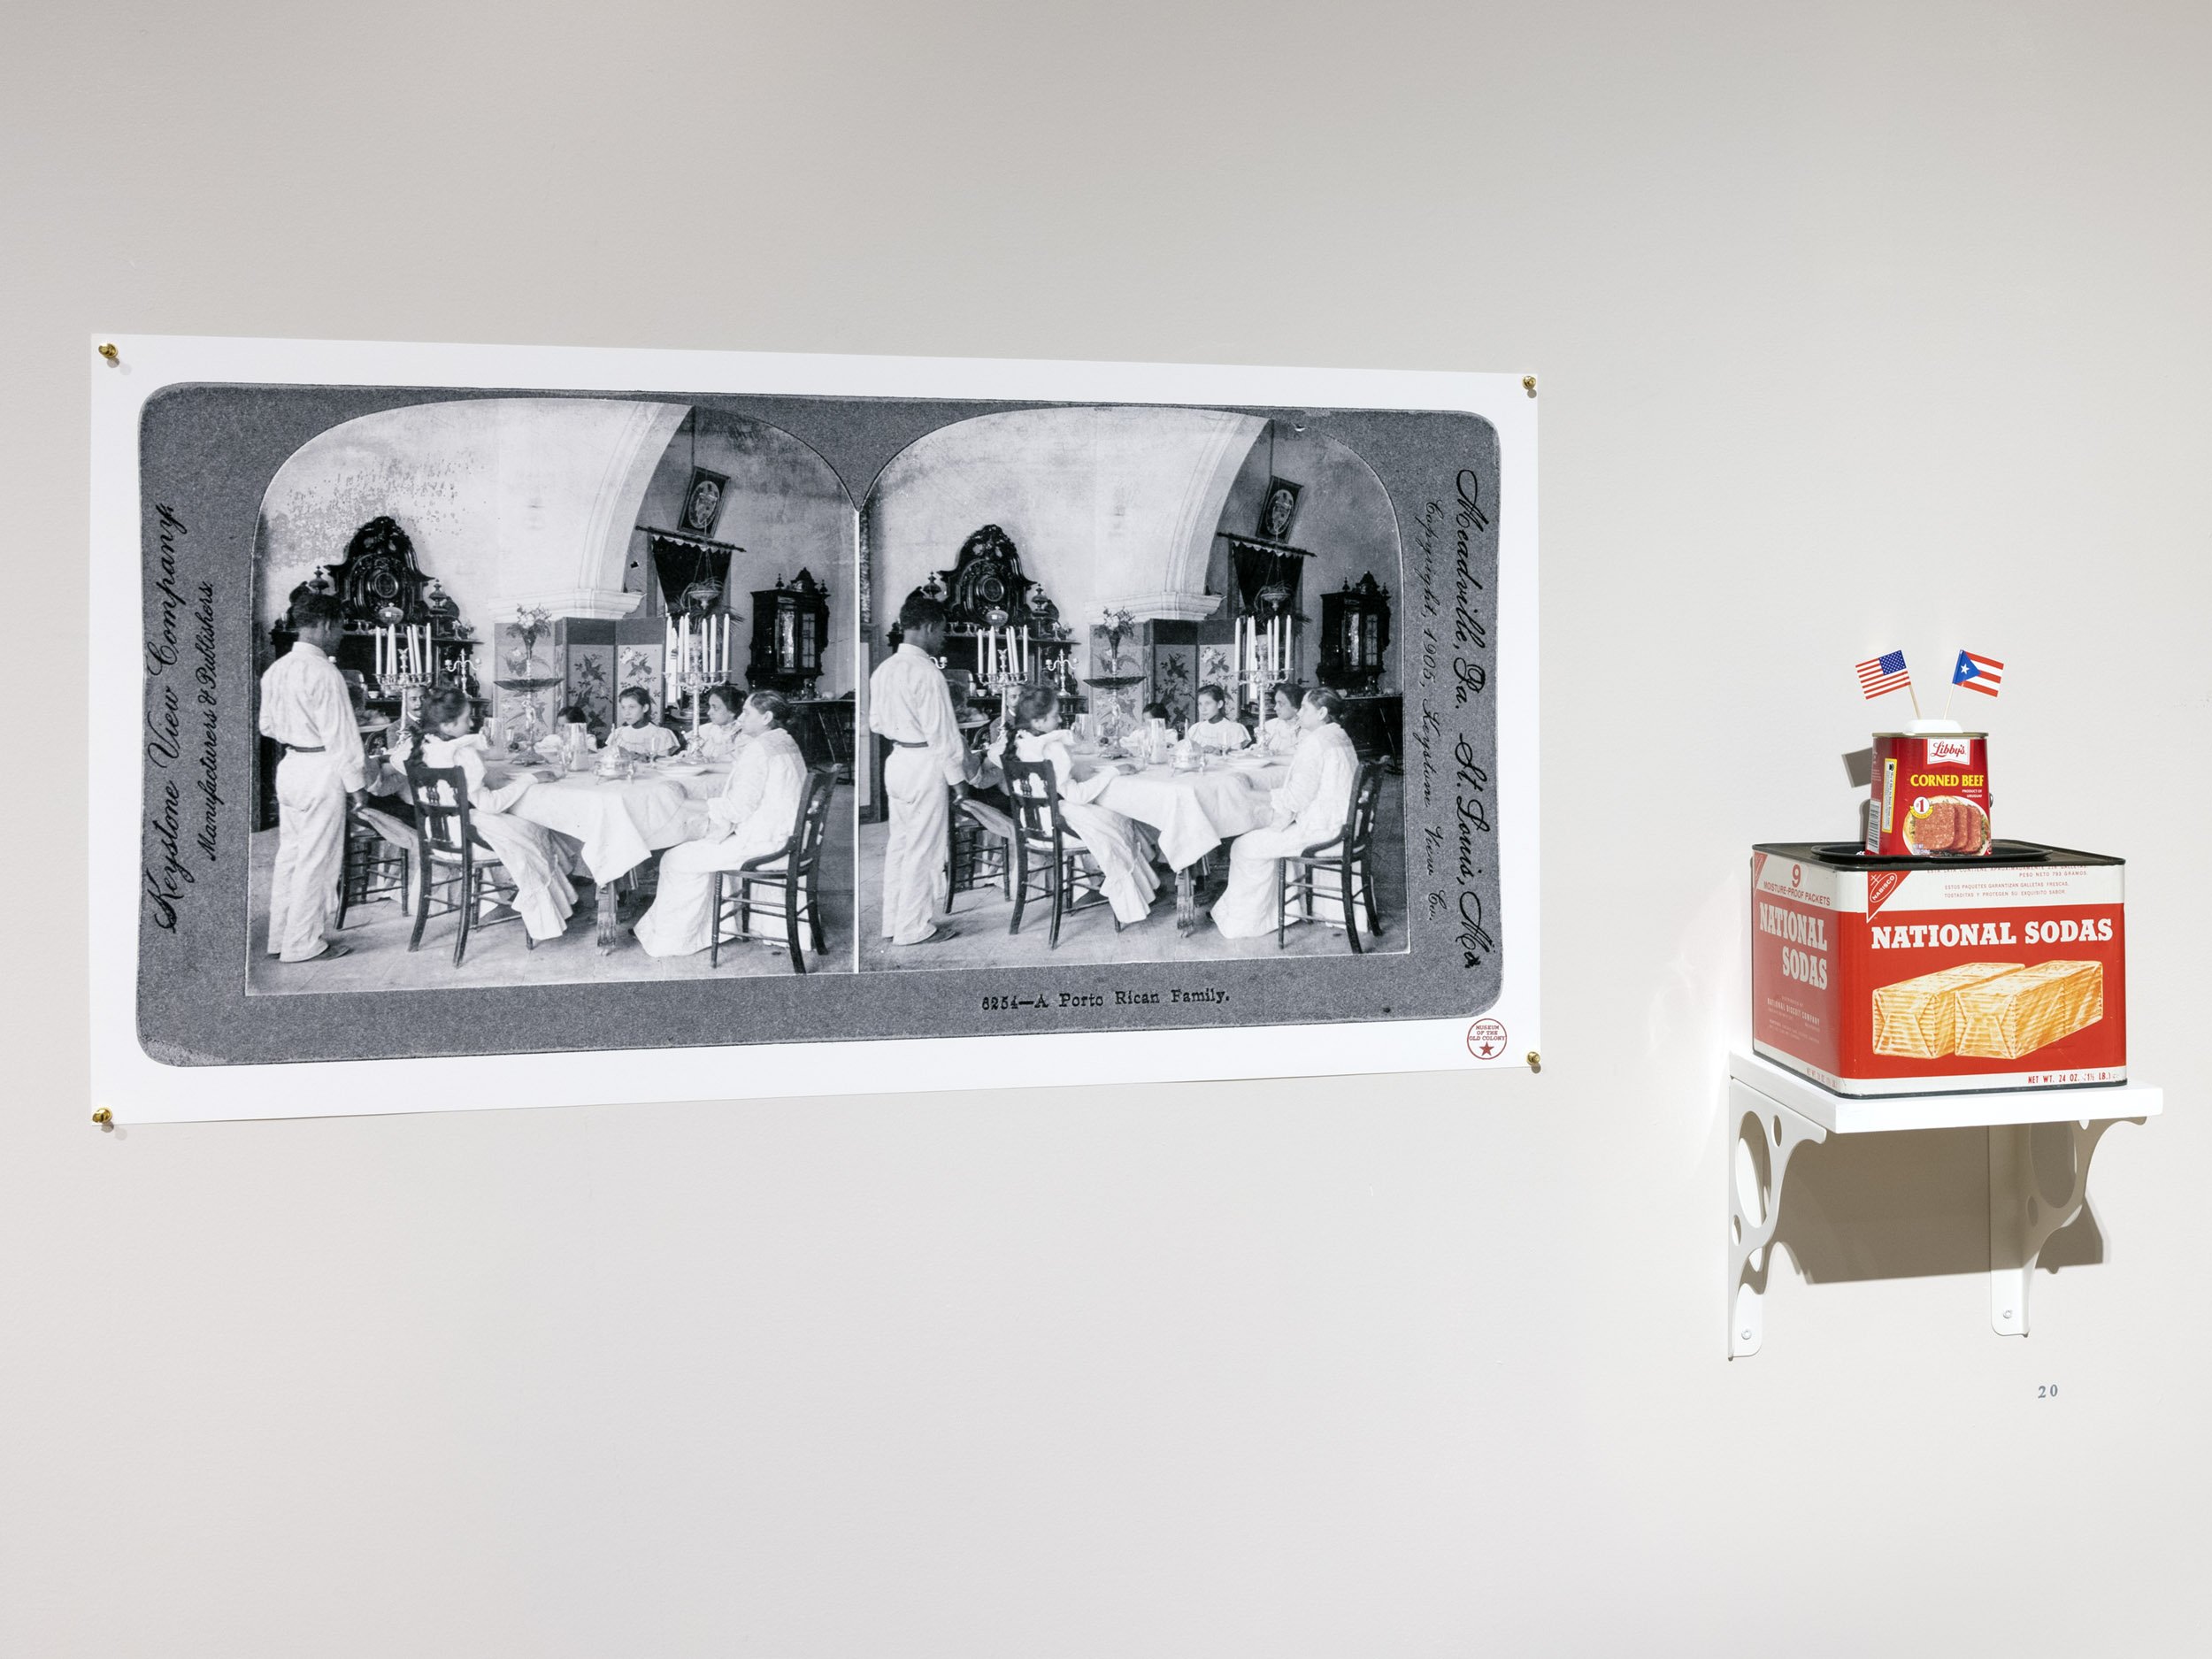  Installation view.  A Porto Rican Family . Keystone View Company, Meadville, PA, 1905 | 2021 and  Plum Pudding . Assemblage of found objects: Libby’s Corned Beef, Nabisco National Sodas, and miniature flags | 2021.  The Museum of the Old Colony , Du